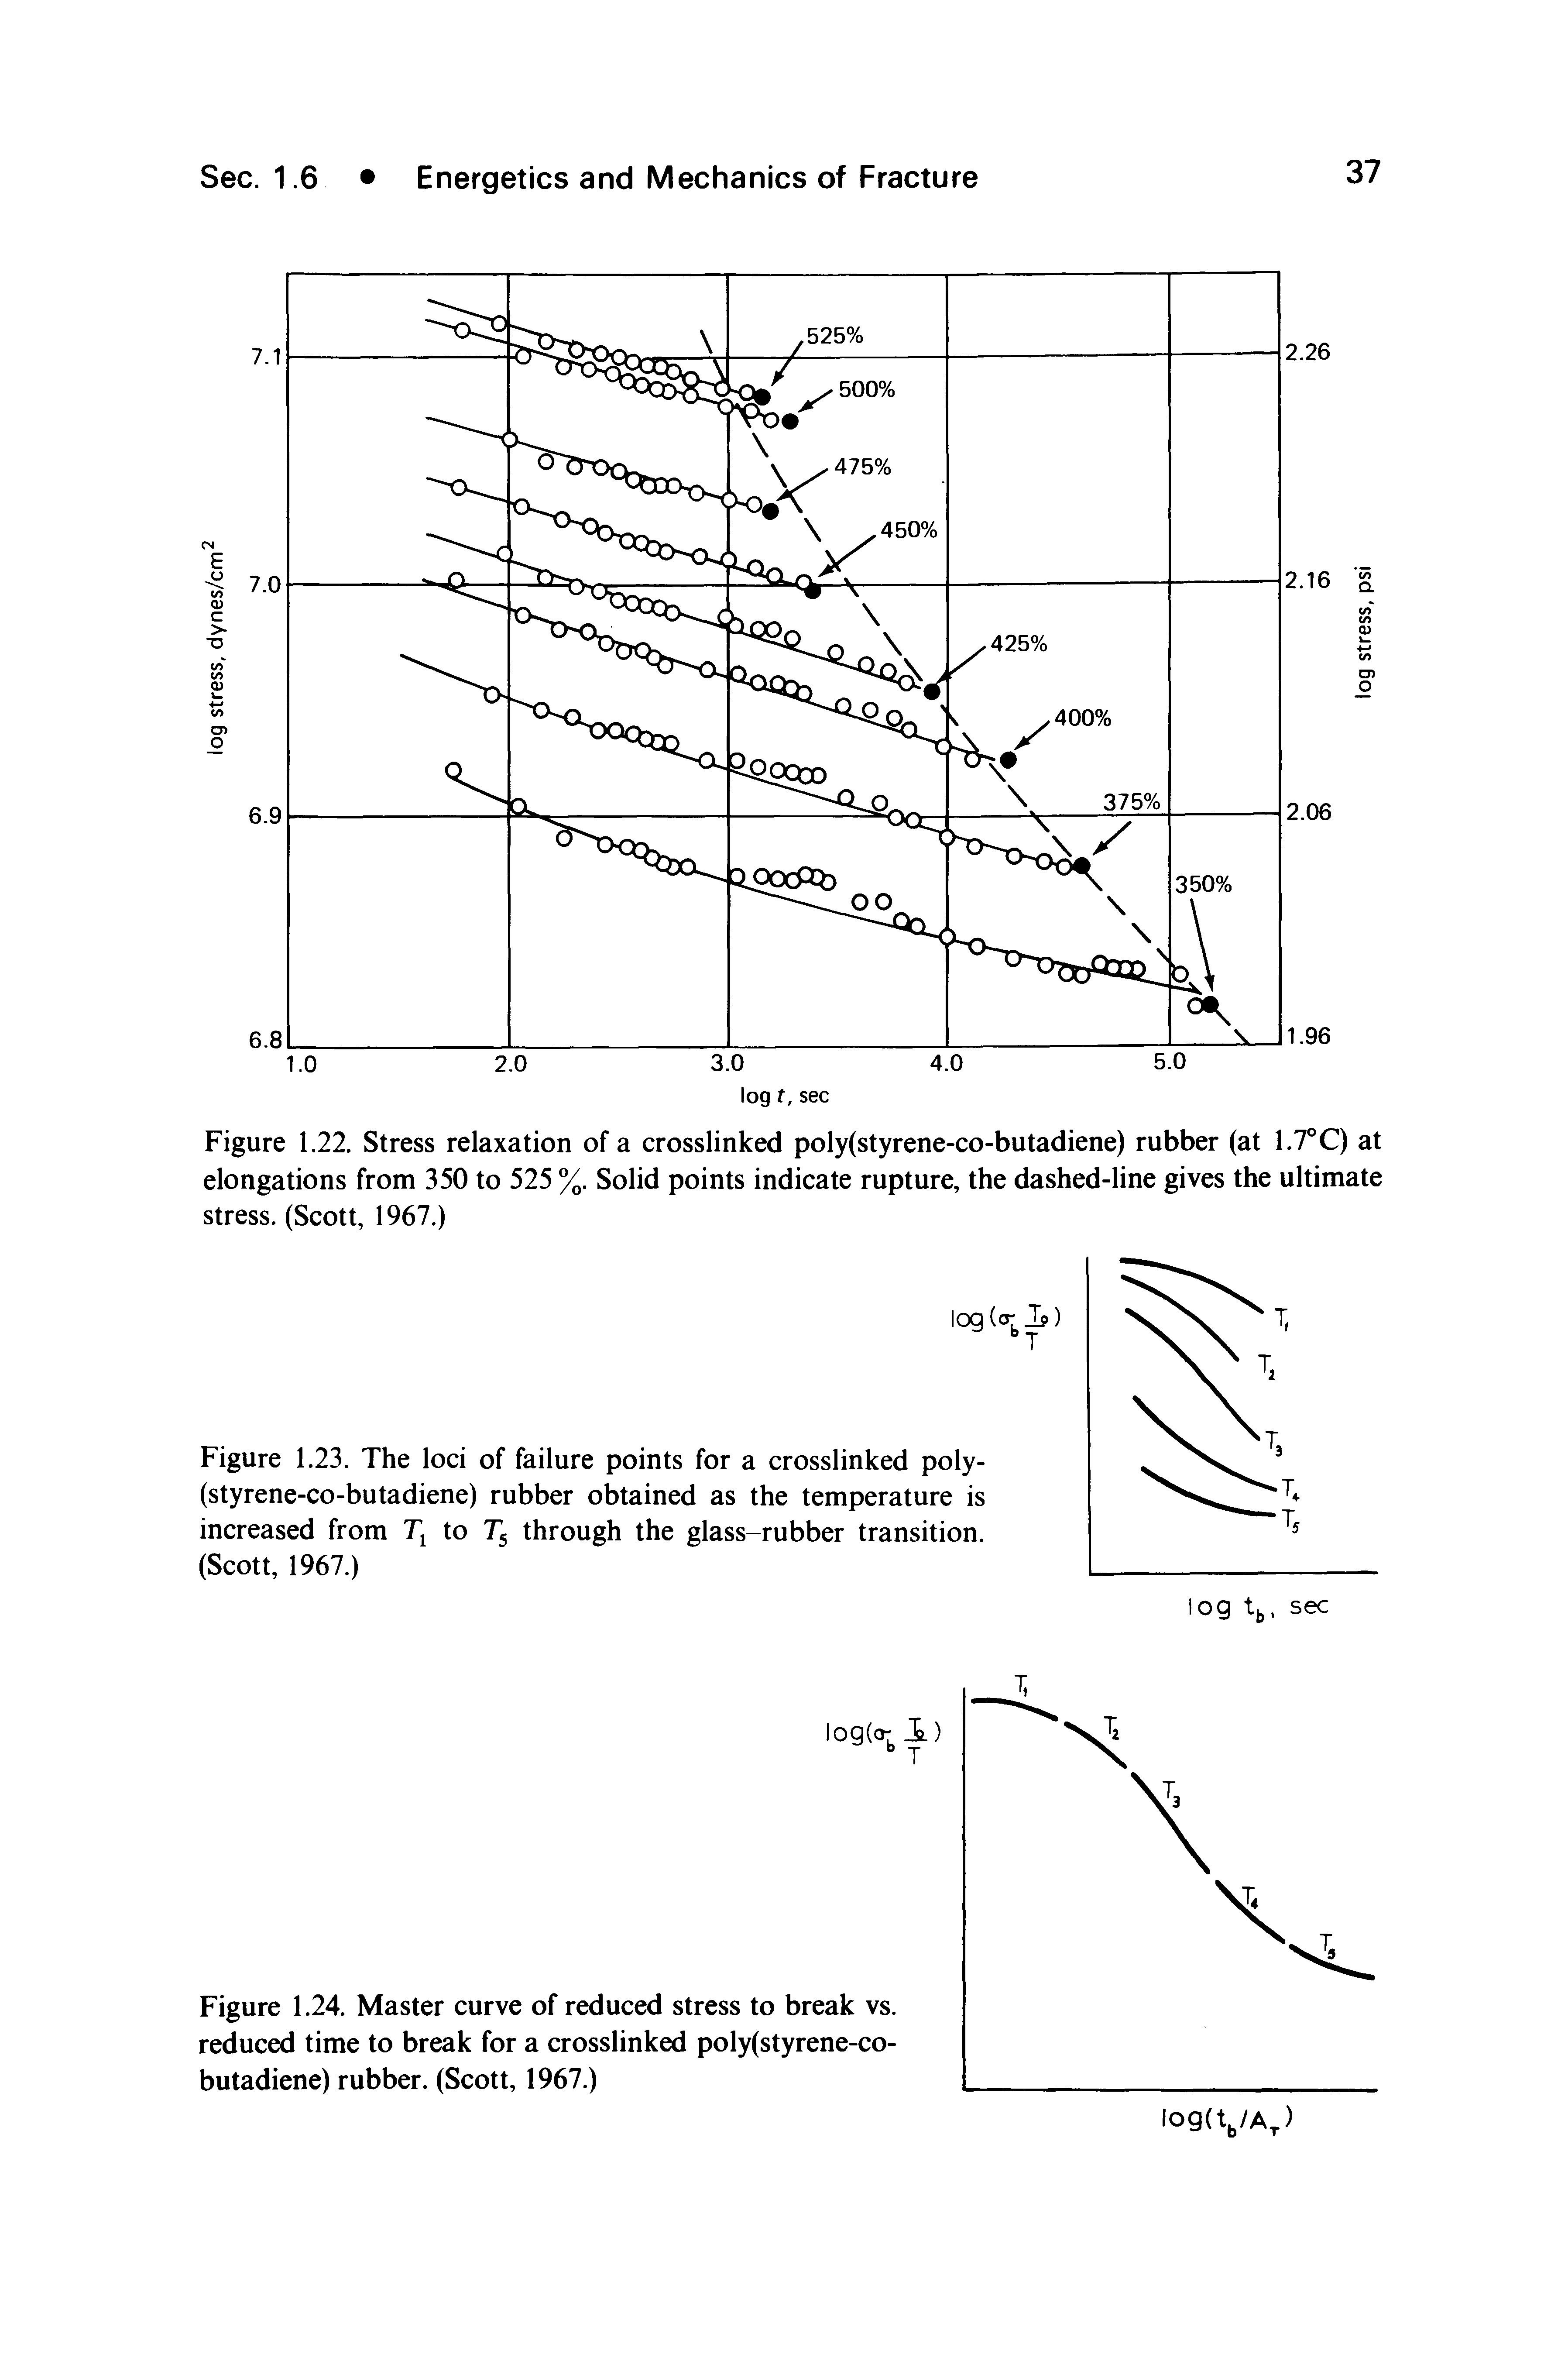 Figure 1.22. Stress relaxation of a crosslinked poly(styrene-co-butadiene) rubber (at 1.7°C) at elongations from 350 to 525 %. Solid points indicate rupture, the dashed-line gives the ultimate stress. (Scott, 1967.)...